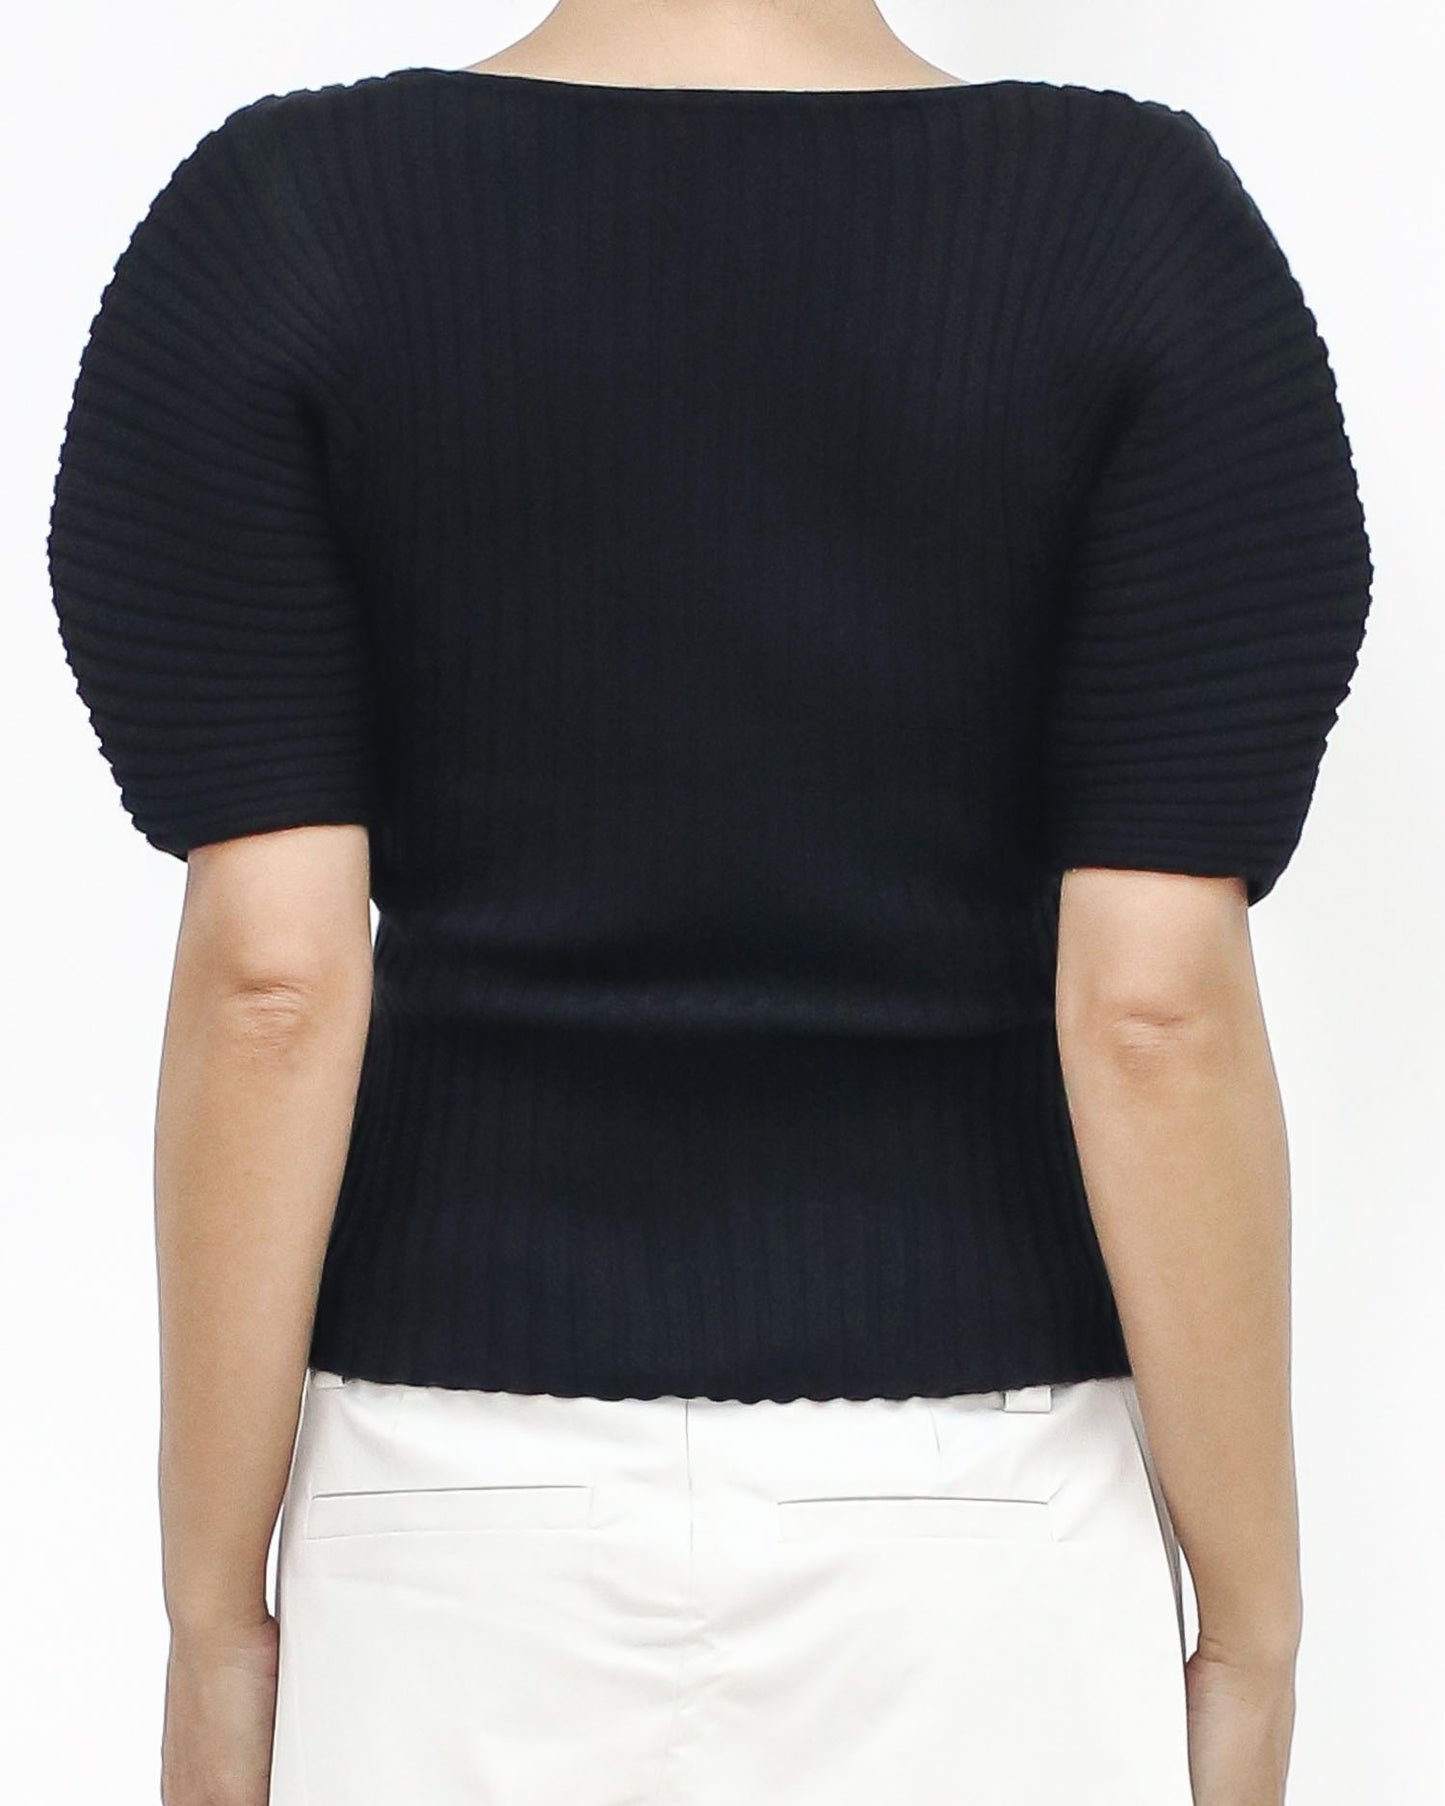 black puff sleeves ottoman knitted top *pre-order*